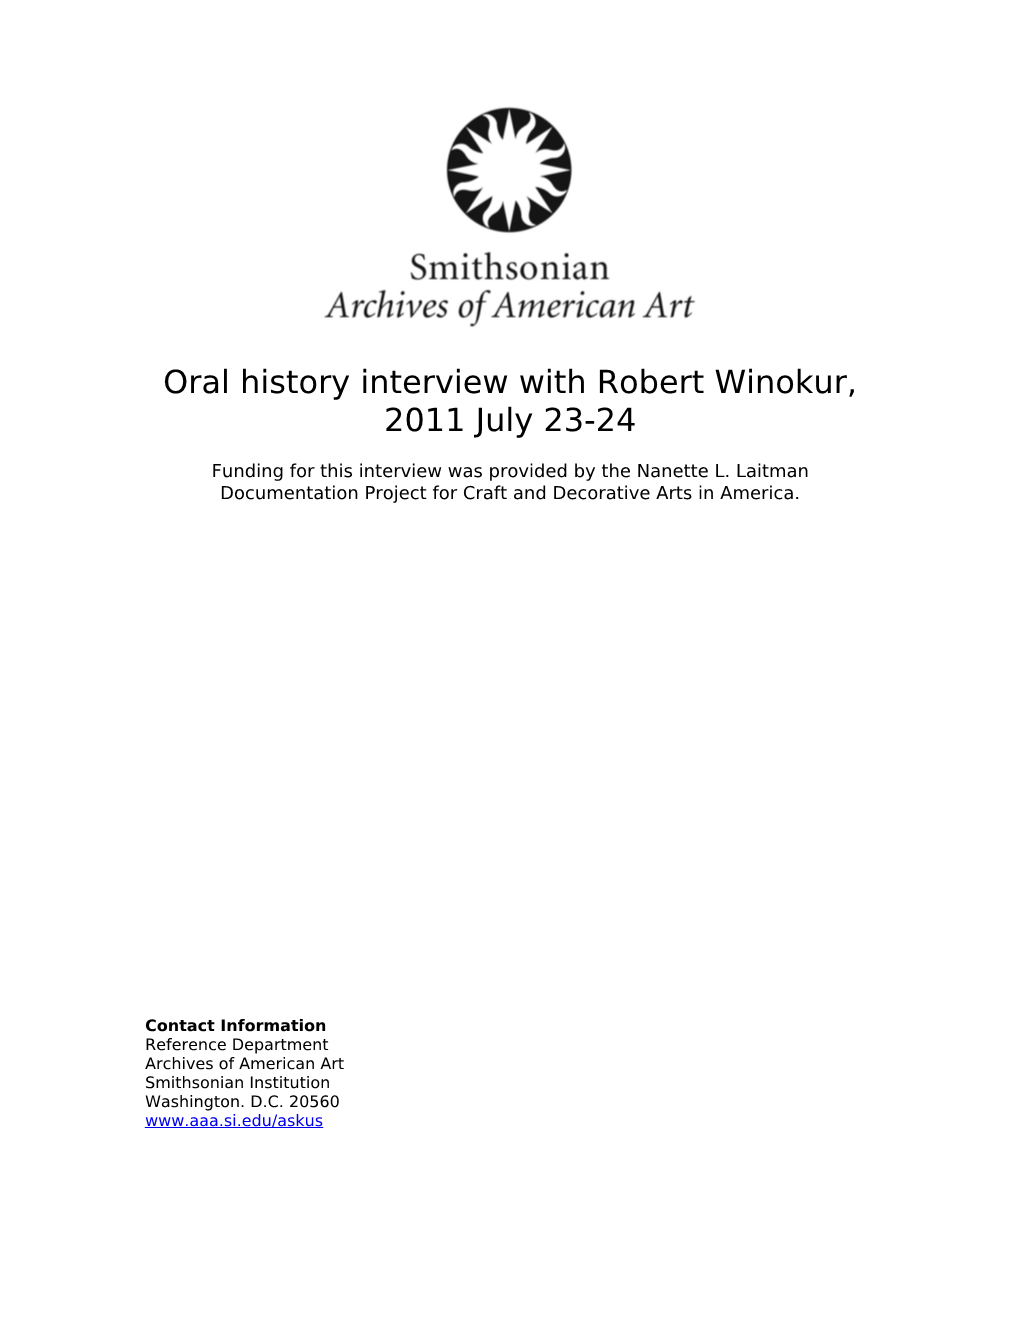 Oral History Interview with Robert Winokur, 2011 July 23-24